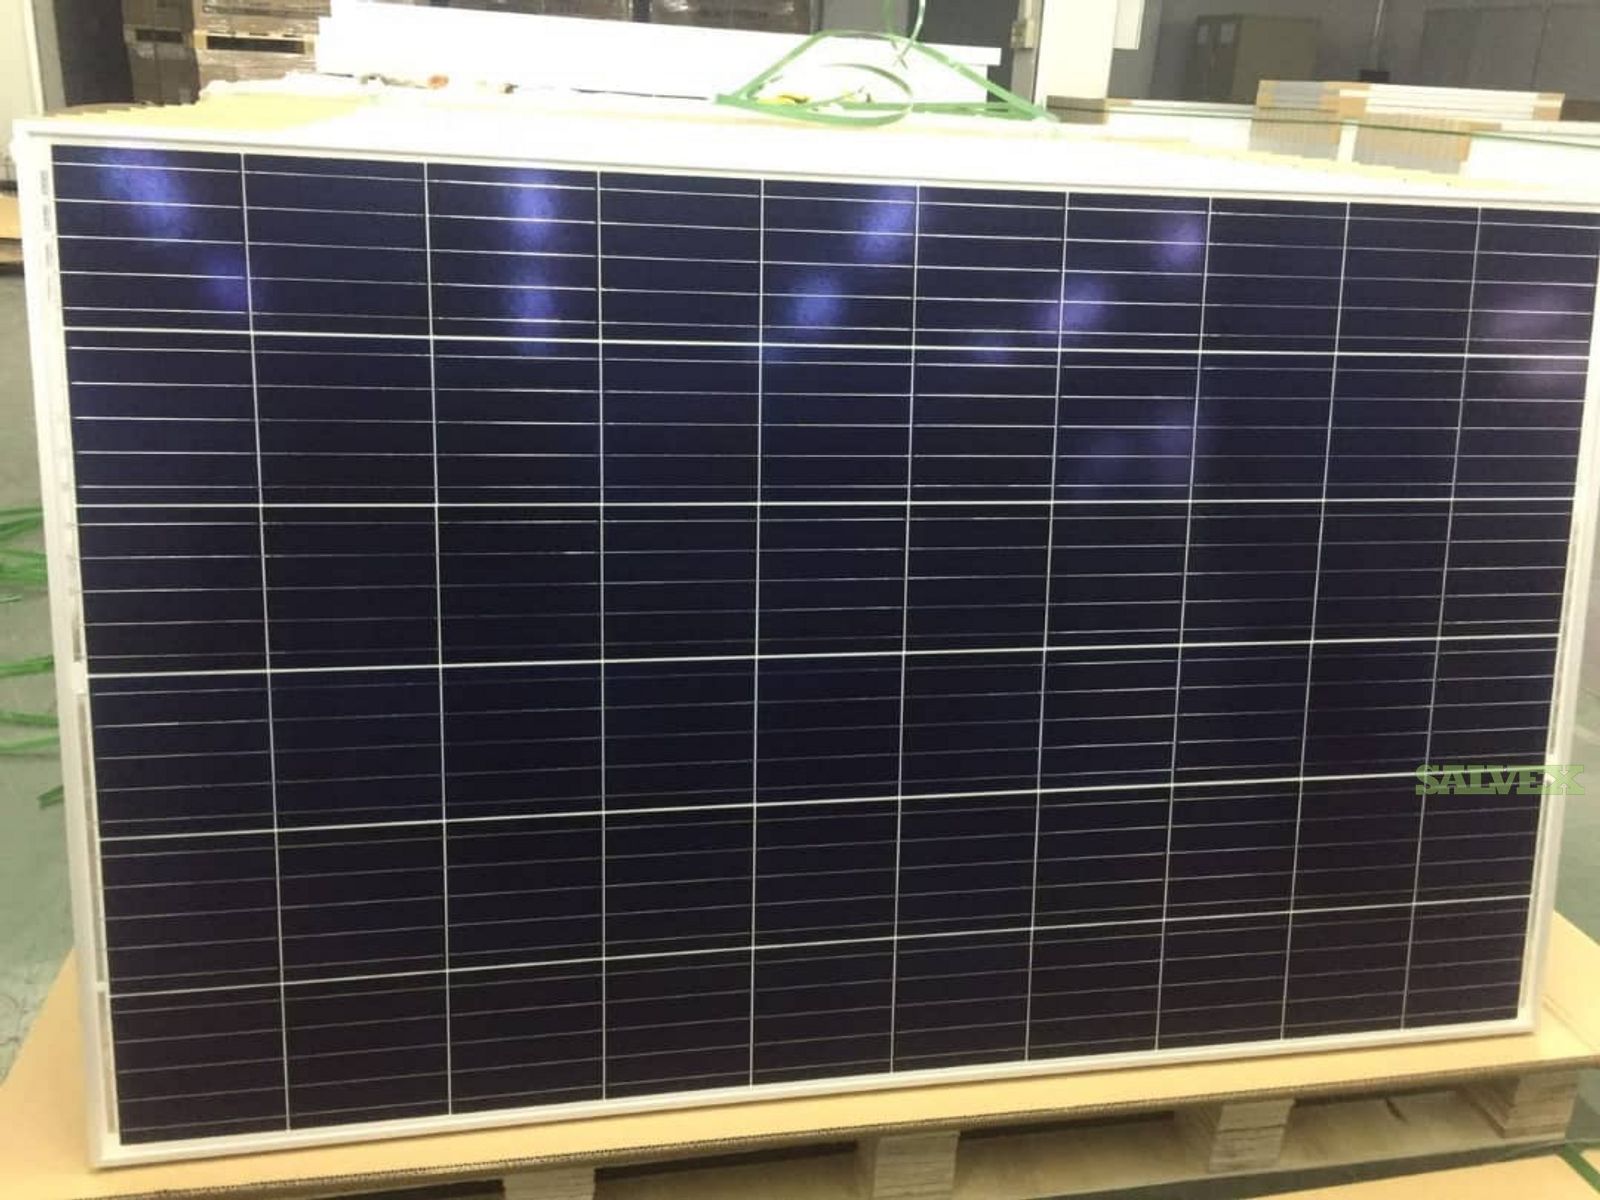 want-solar-panels-for-your-philadelphia-home-city-reopens-program-to